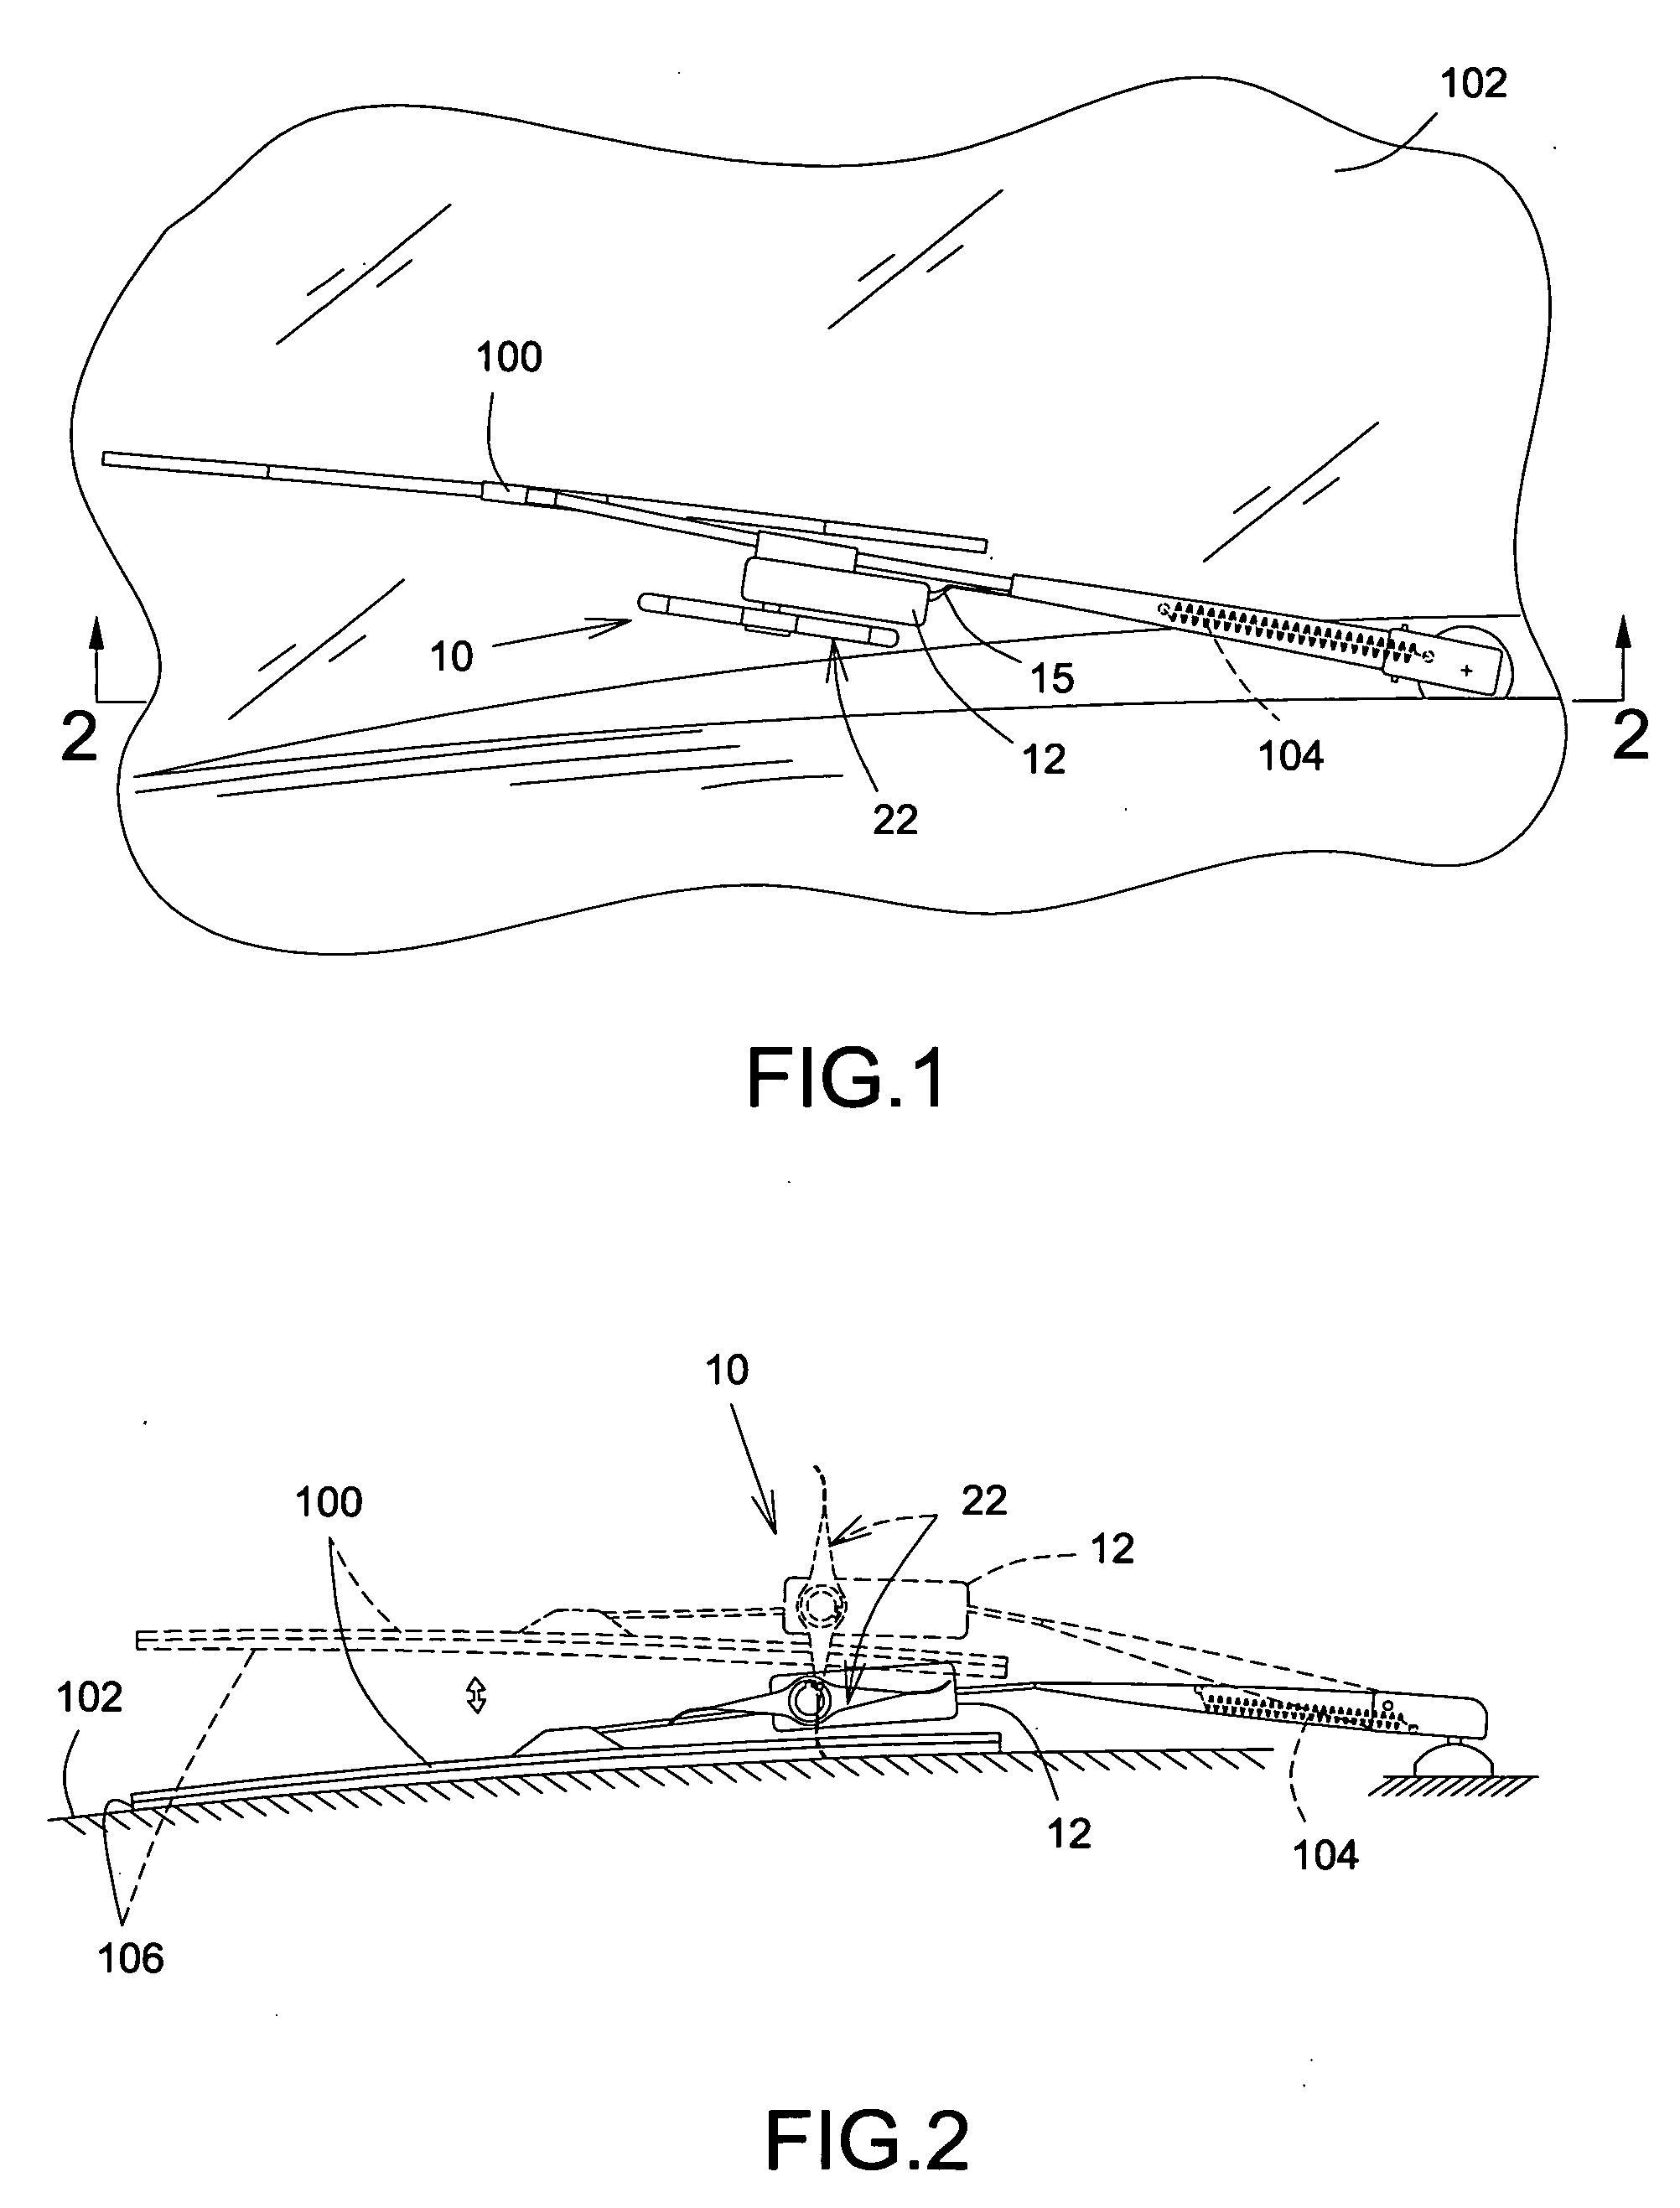 Snow removal and deicing device for windshield wiper